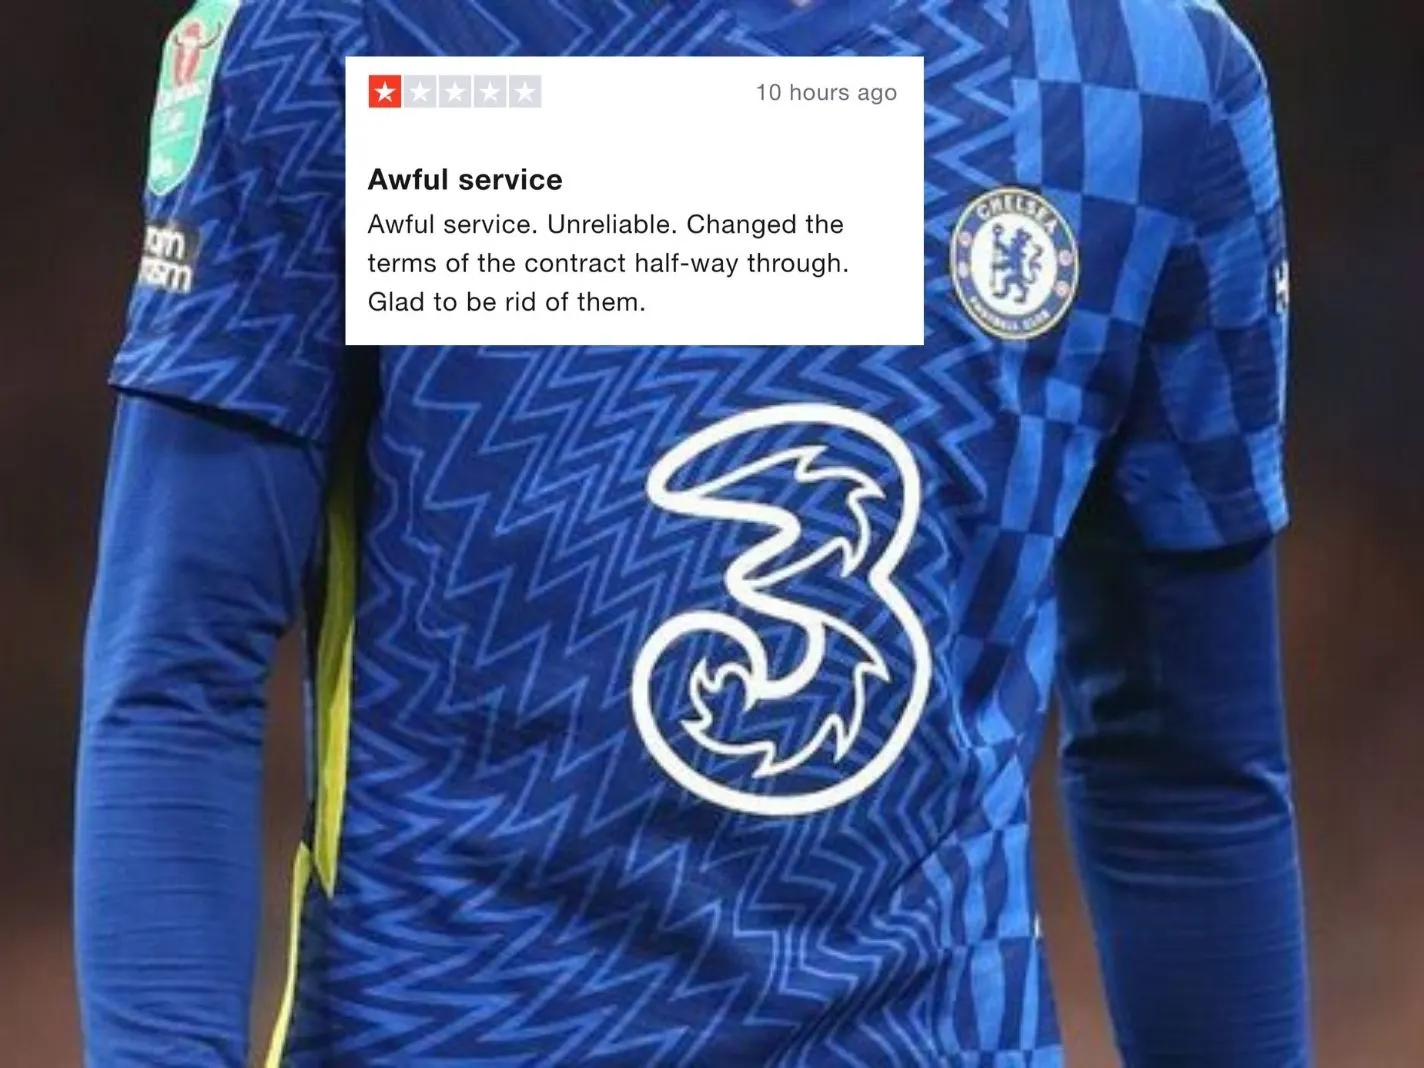 Chelsea fans go after Three UK's Trustpilot reviews after company drops sponsorship -